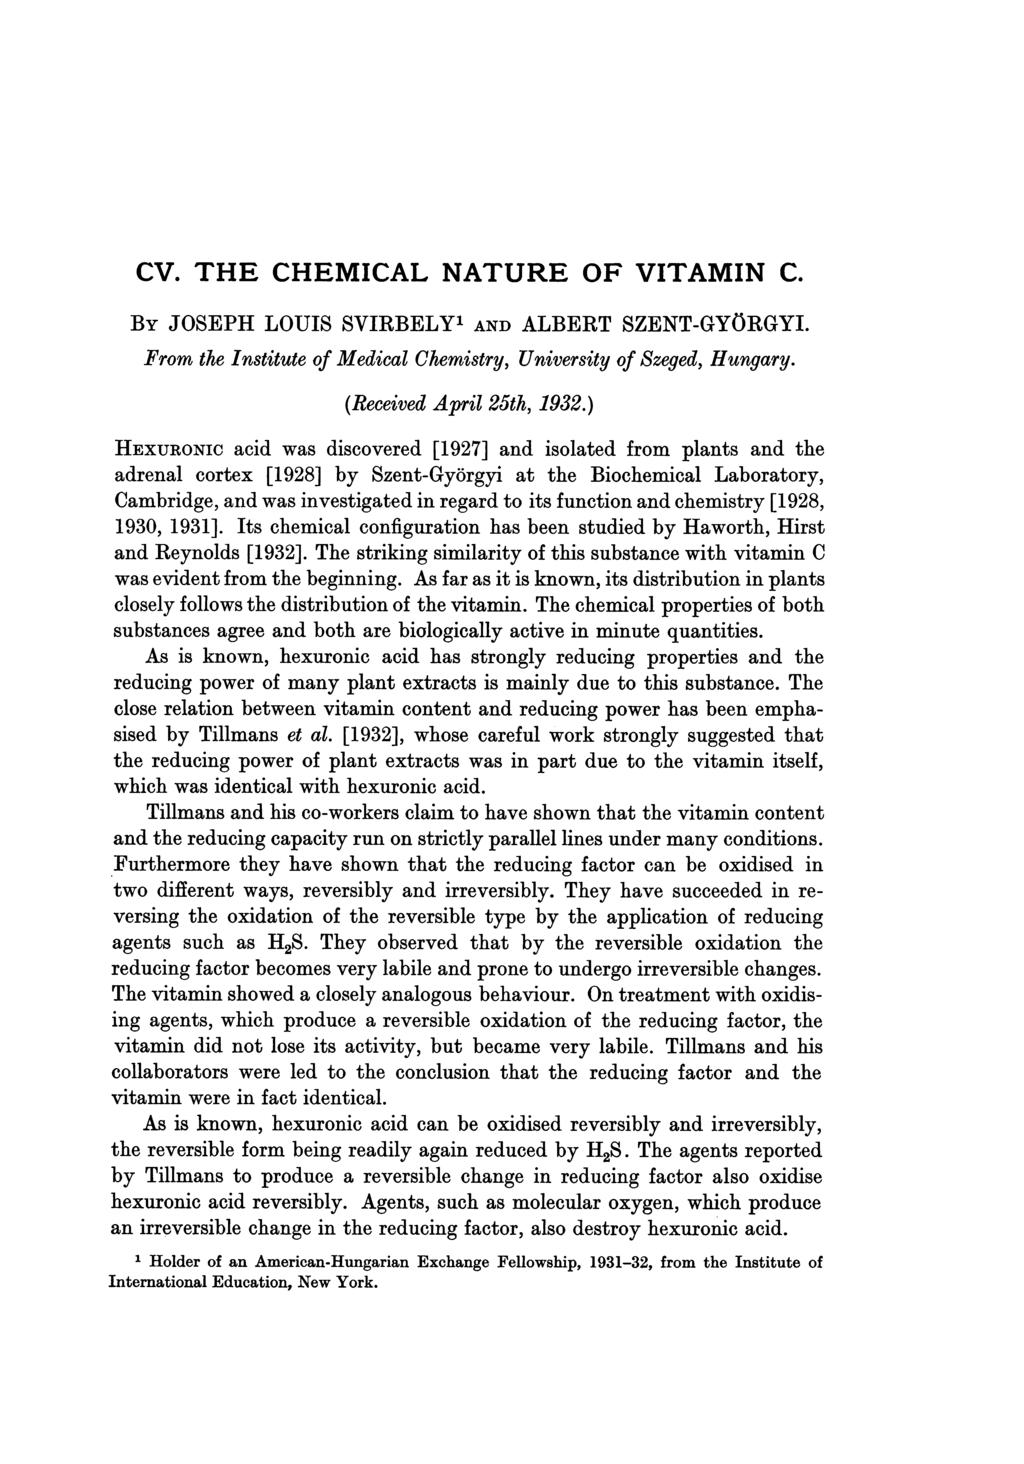 CV. THE CHEMICAL NATURE OF VITAMIN C. BY JOSEPH LOUIS SVIRBELY1 AND ALBERT SZENT-GYORGYI. From the Institute of Medical Chemistry, University of Szeged, Hungary. (Received April 25th, 1932.